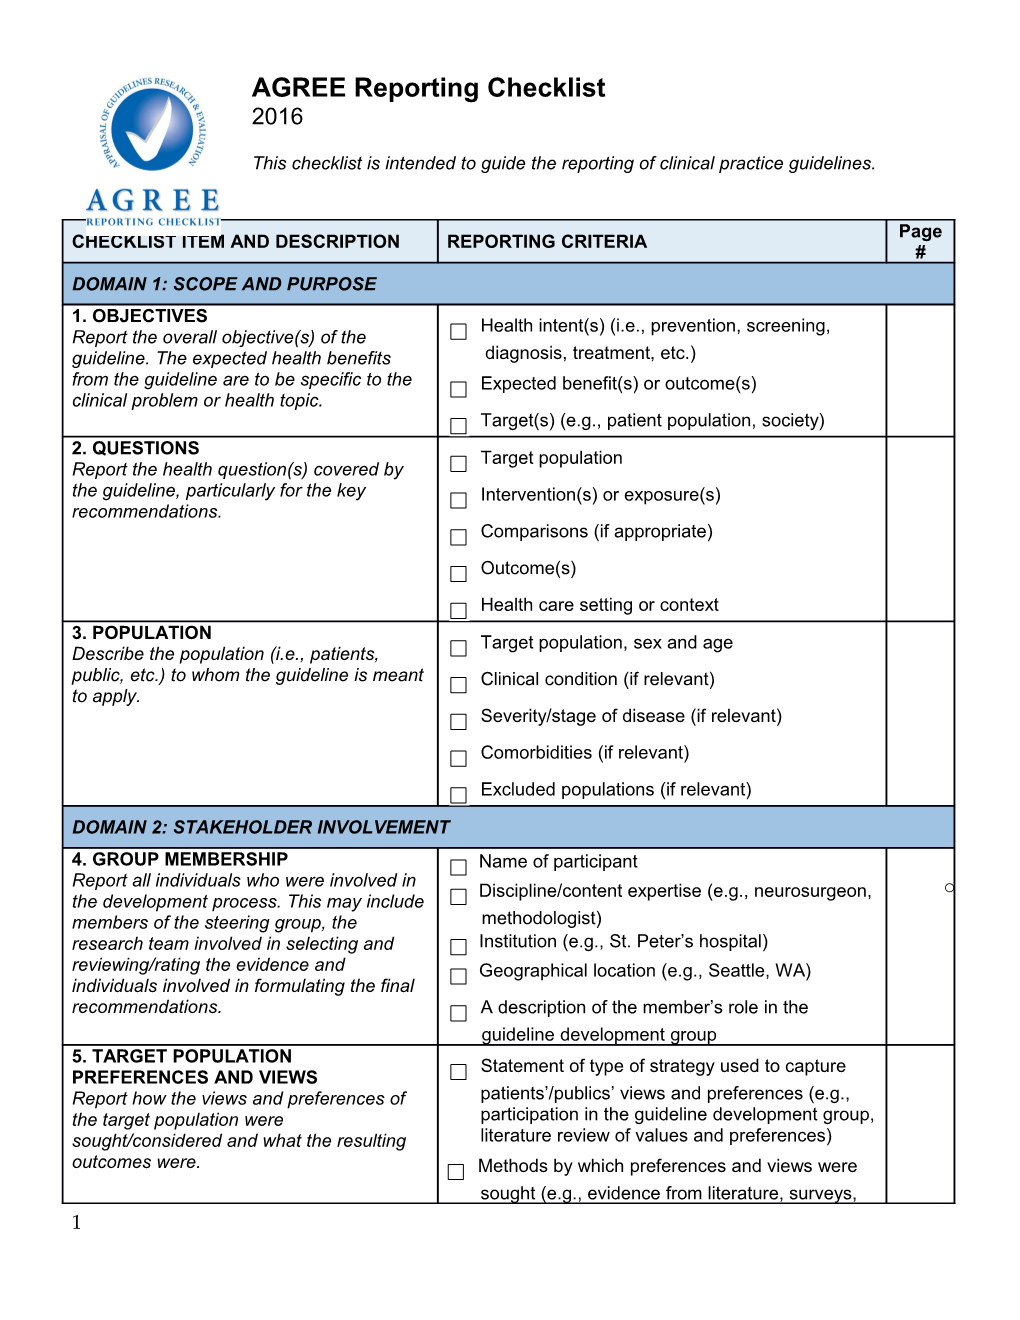 This Checklist Is Intended to Guide the Reporting of Clinical Practice Guidelines